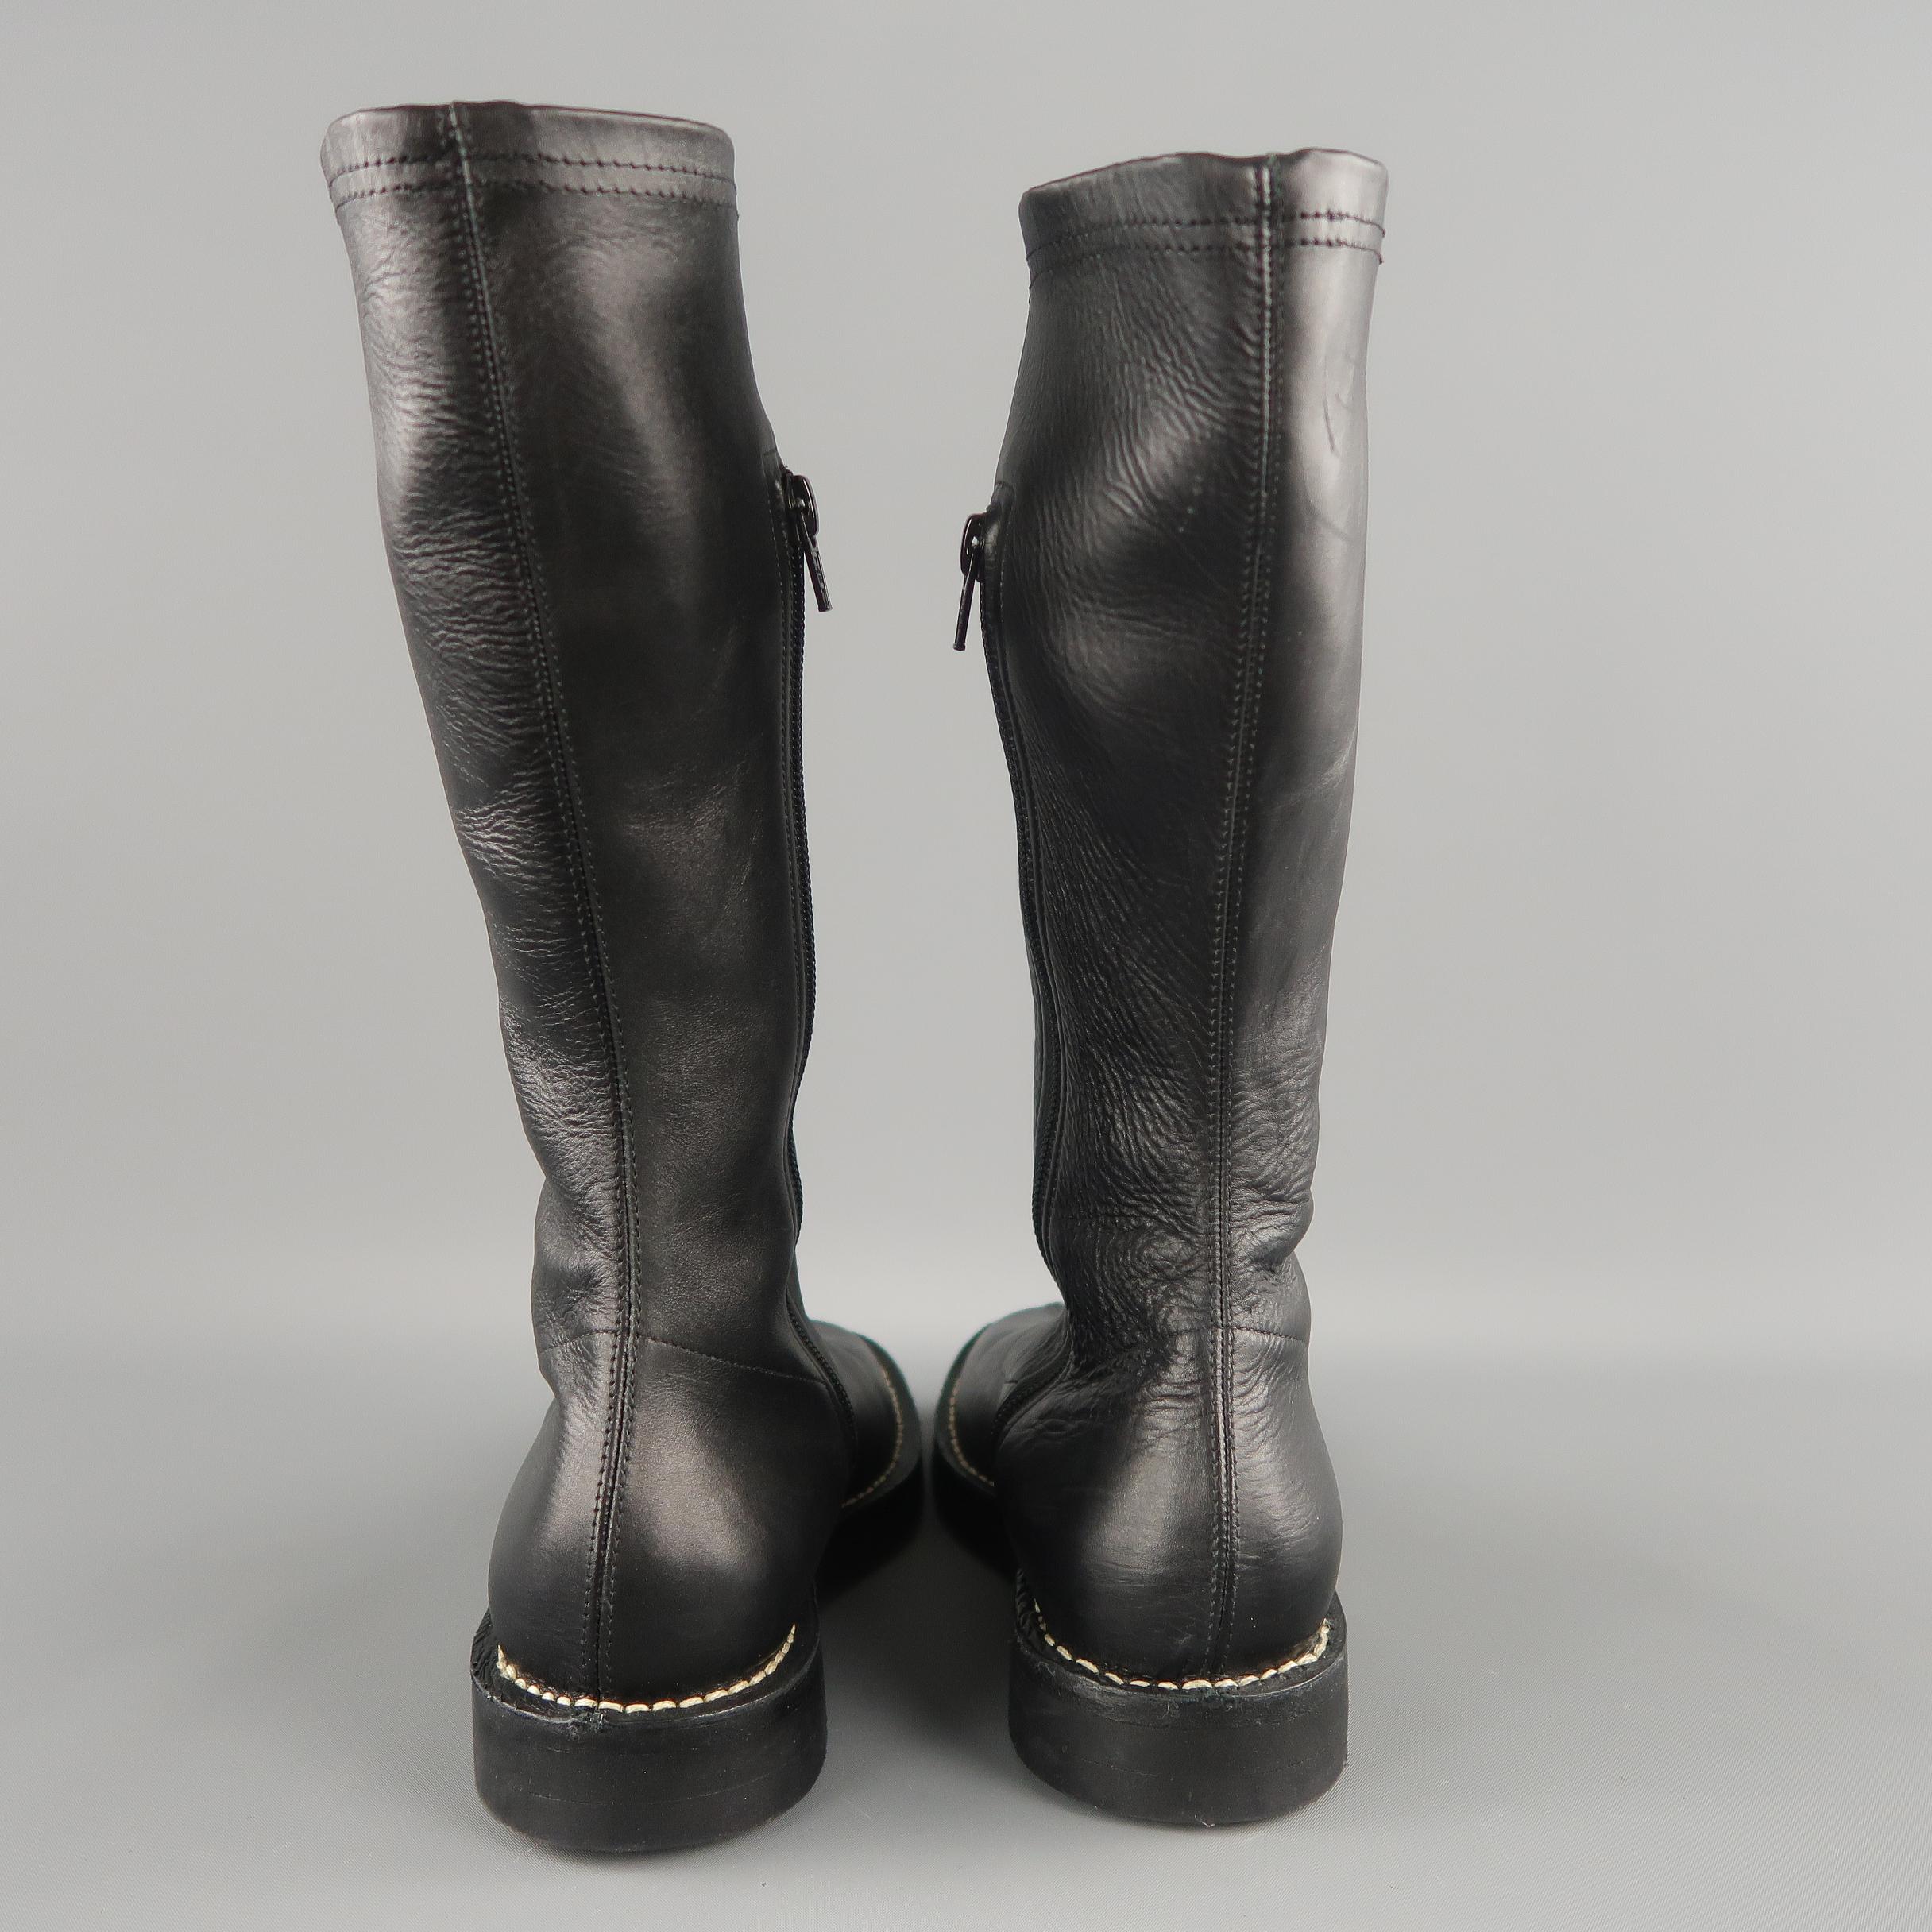 ANN DEMEULEMEESTER Size 6.5 Black Leather Conrast Stitch Calf Boots 3